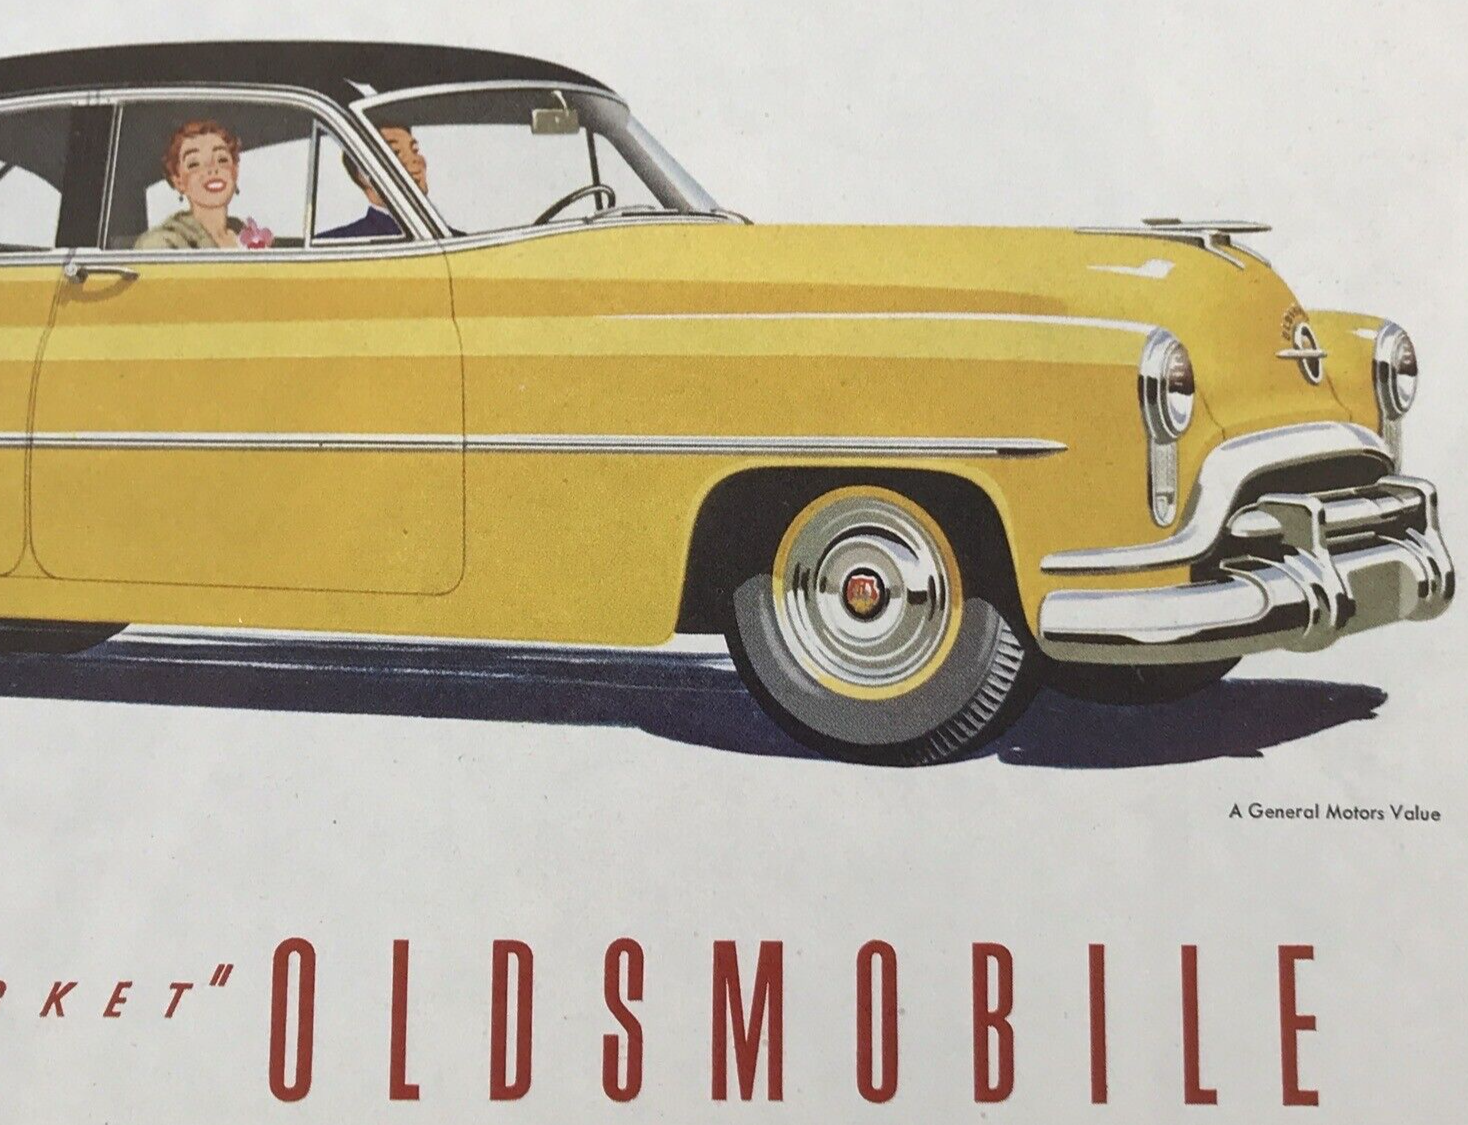 Primary image for 1950s Yellow GM Oldsmobile Rocket 98 Advertising Print Ad 10" x 13.5"